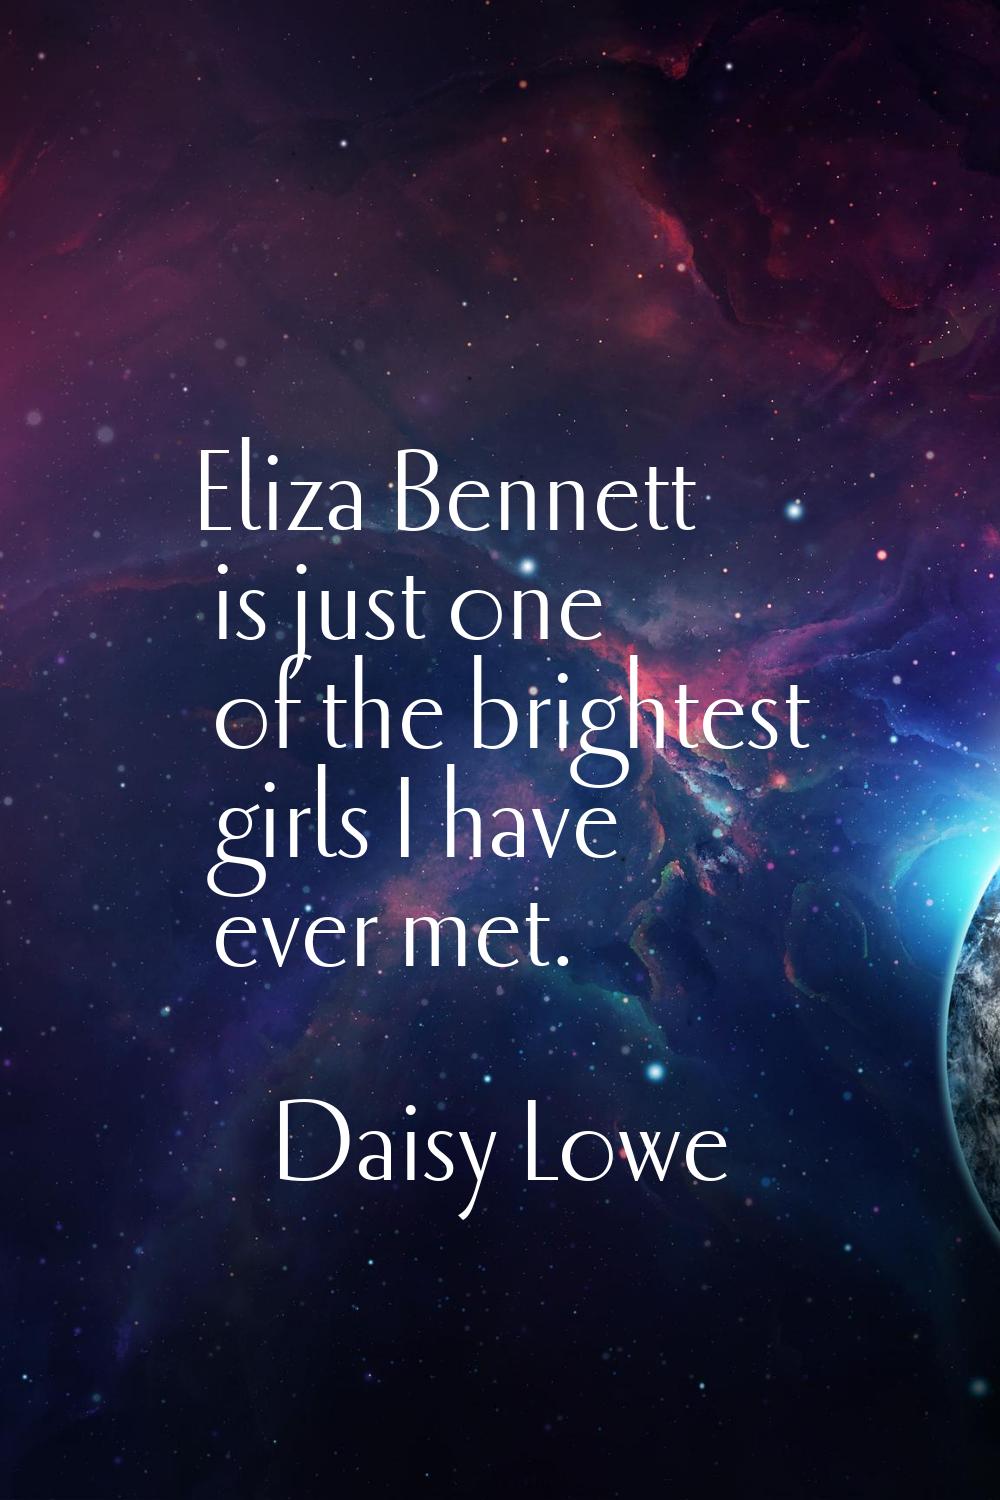 Eliza Bennett is just one of the brightest girls I have ever met.